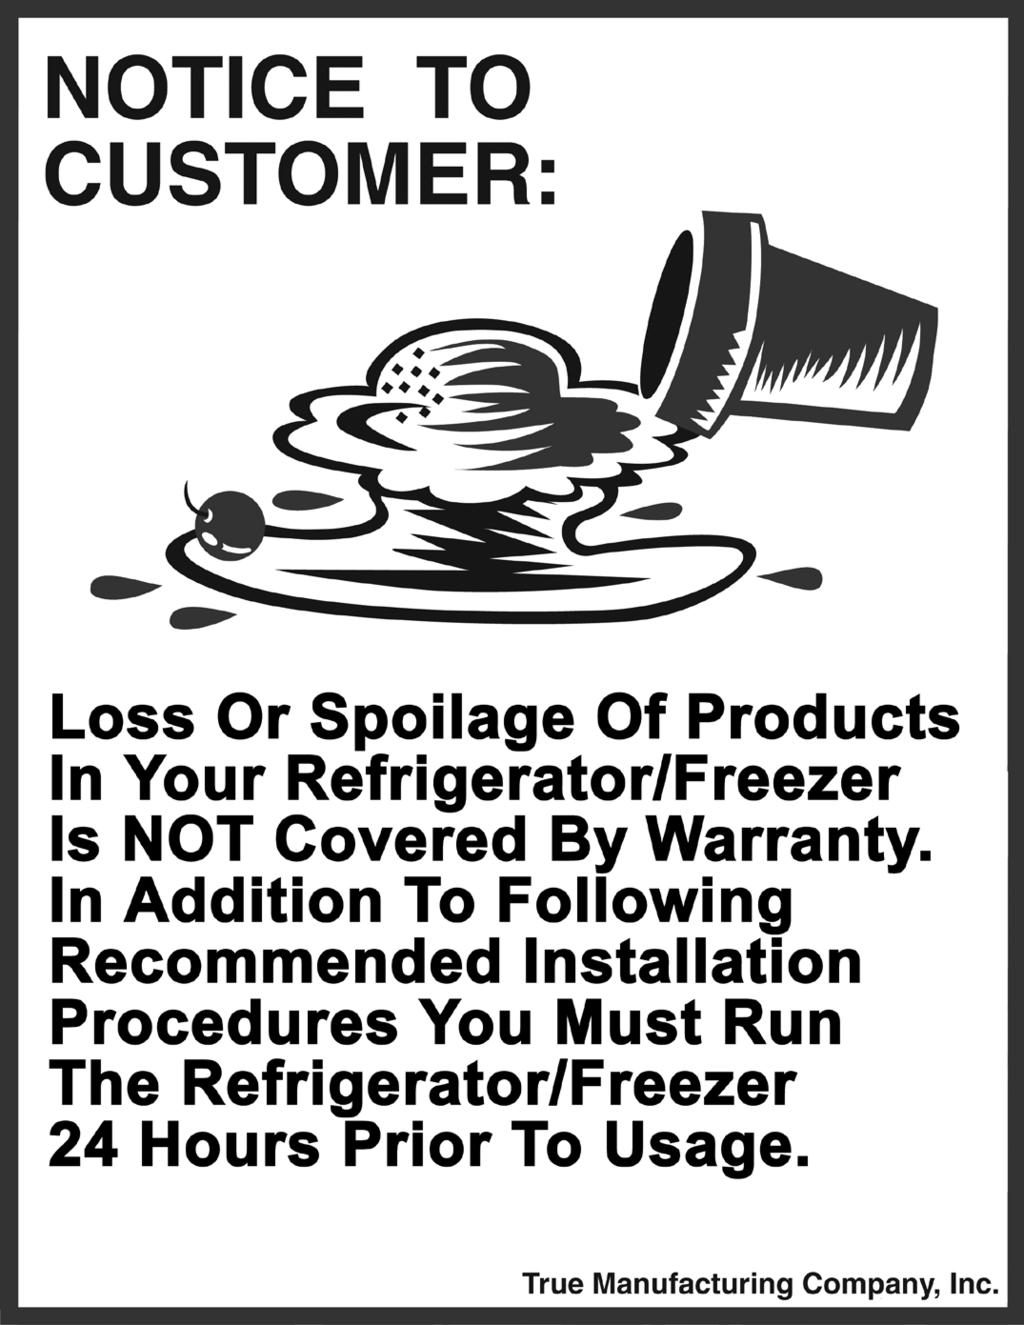 NOTICE TO CUSTOMER Loss or spoilage of products in your refrigerator/ freezer is not covered by warranty.